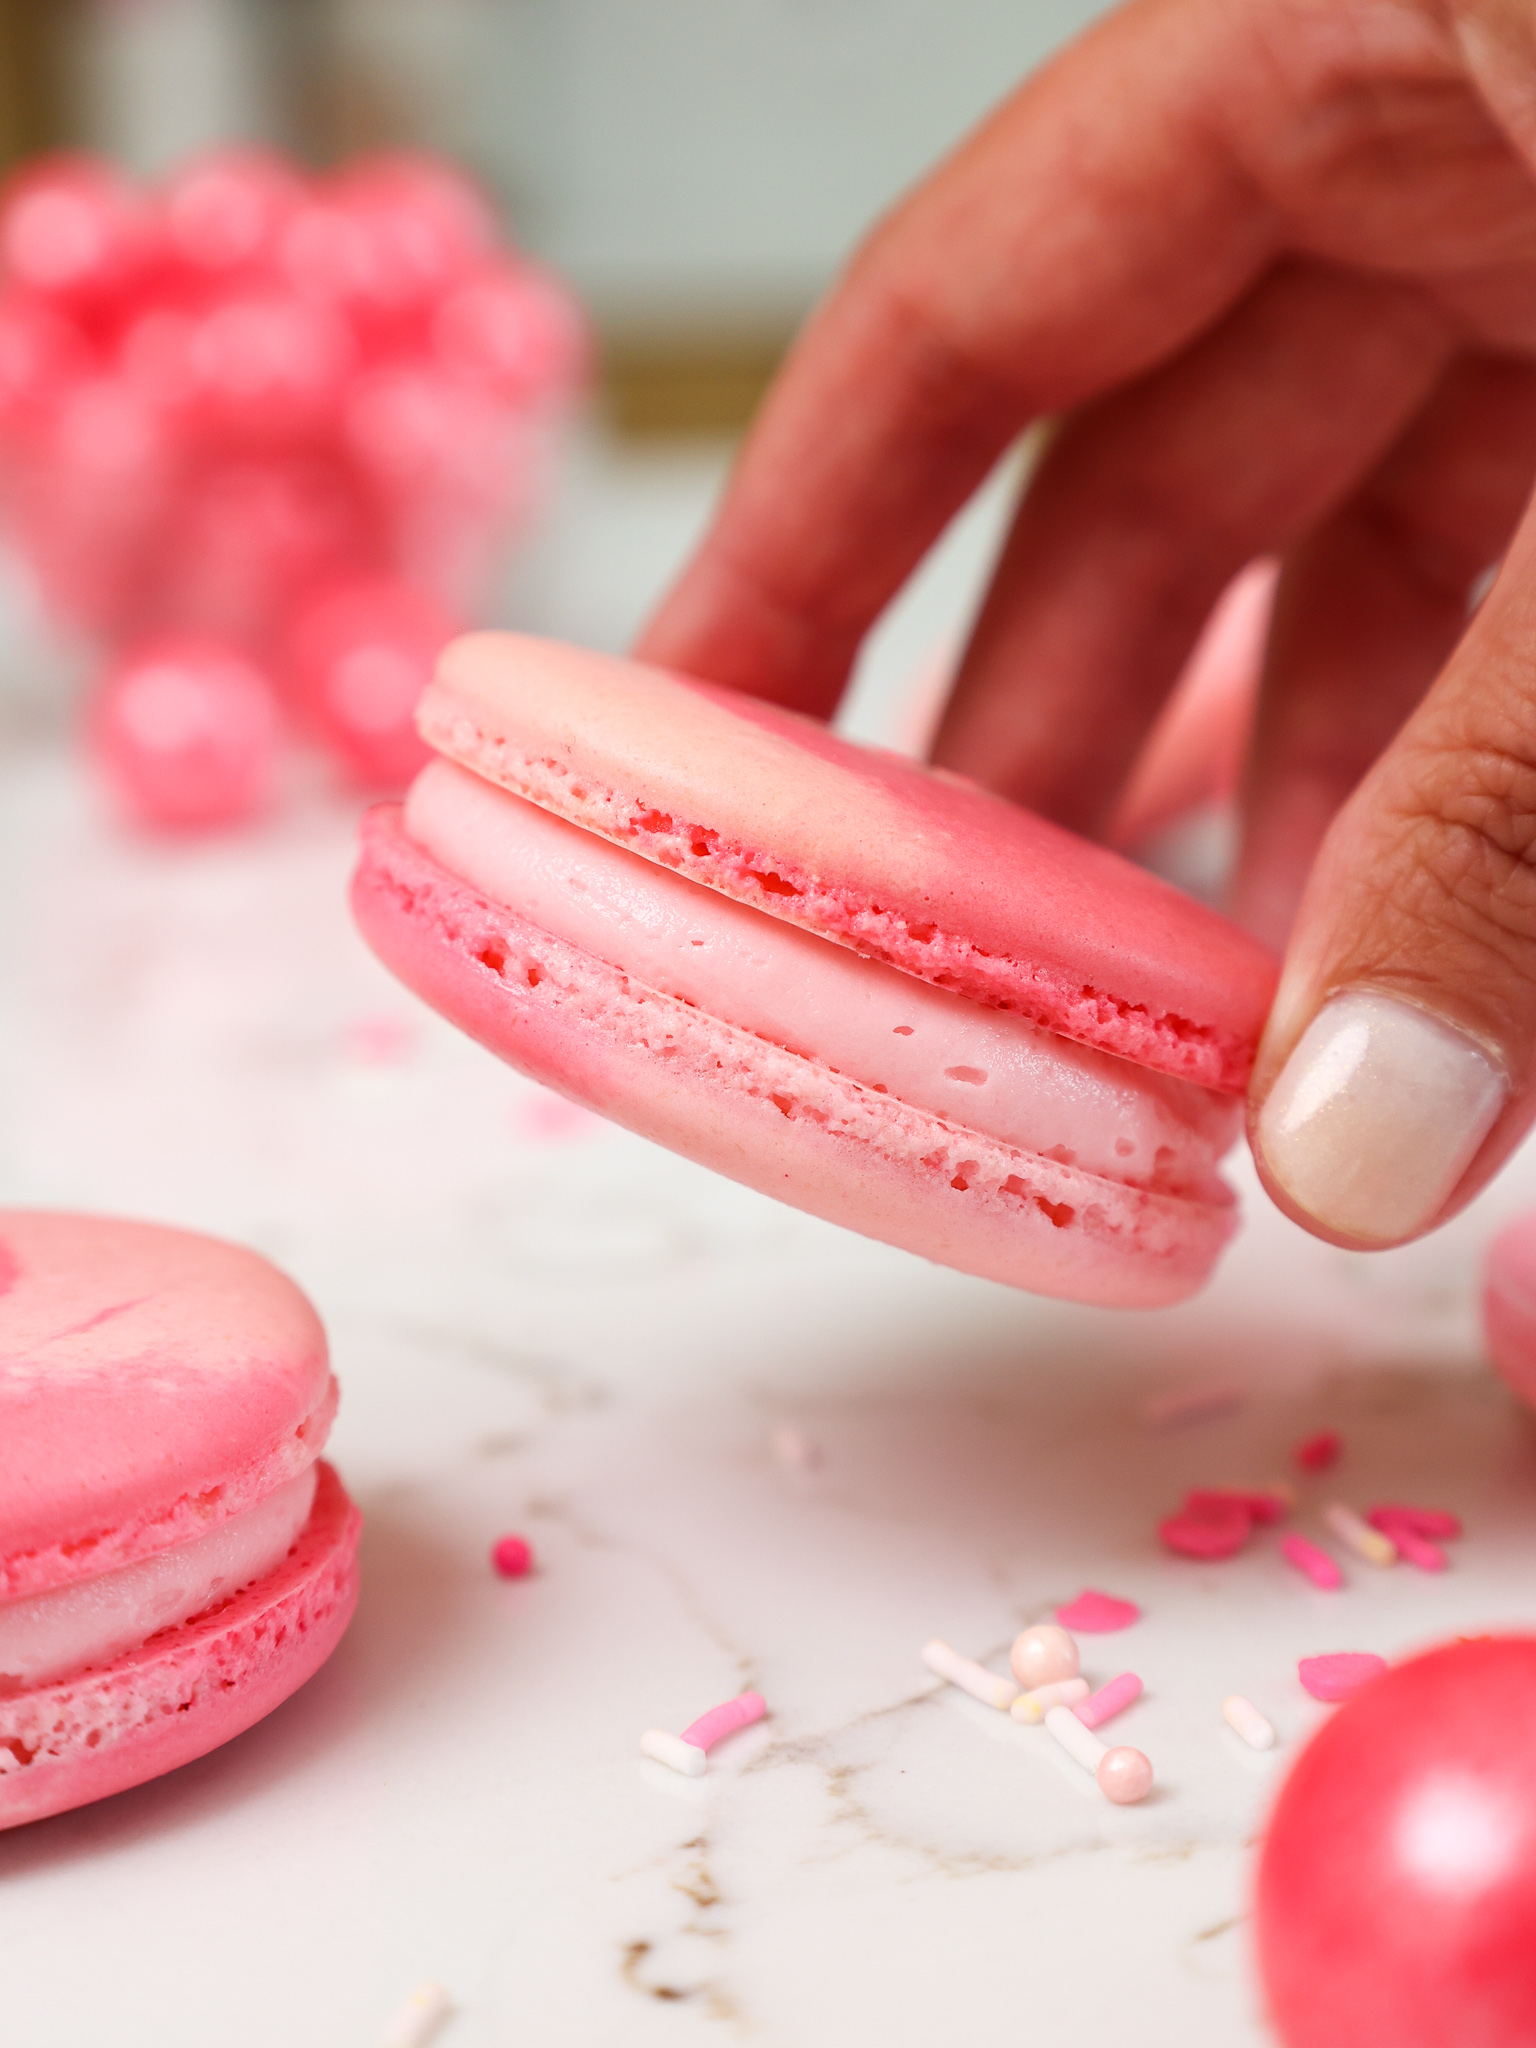 image of a bubblegum macaron being held up to show it's bubblegum frosting filling